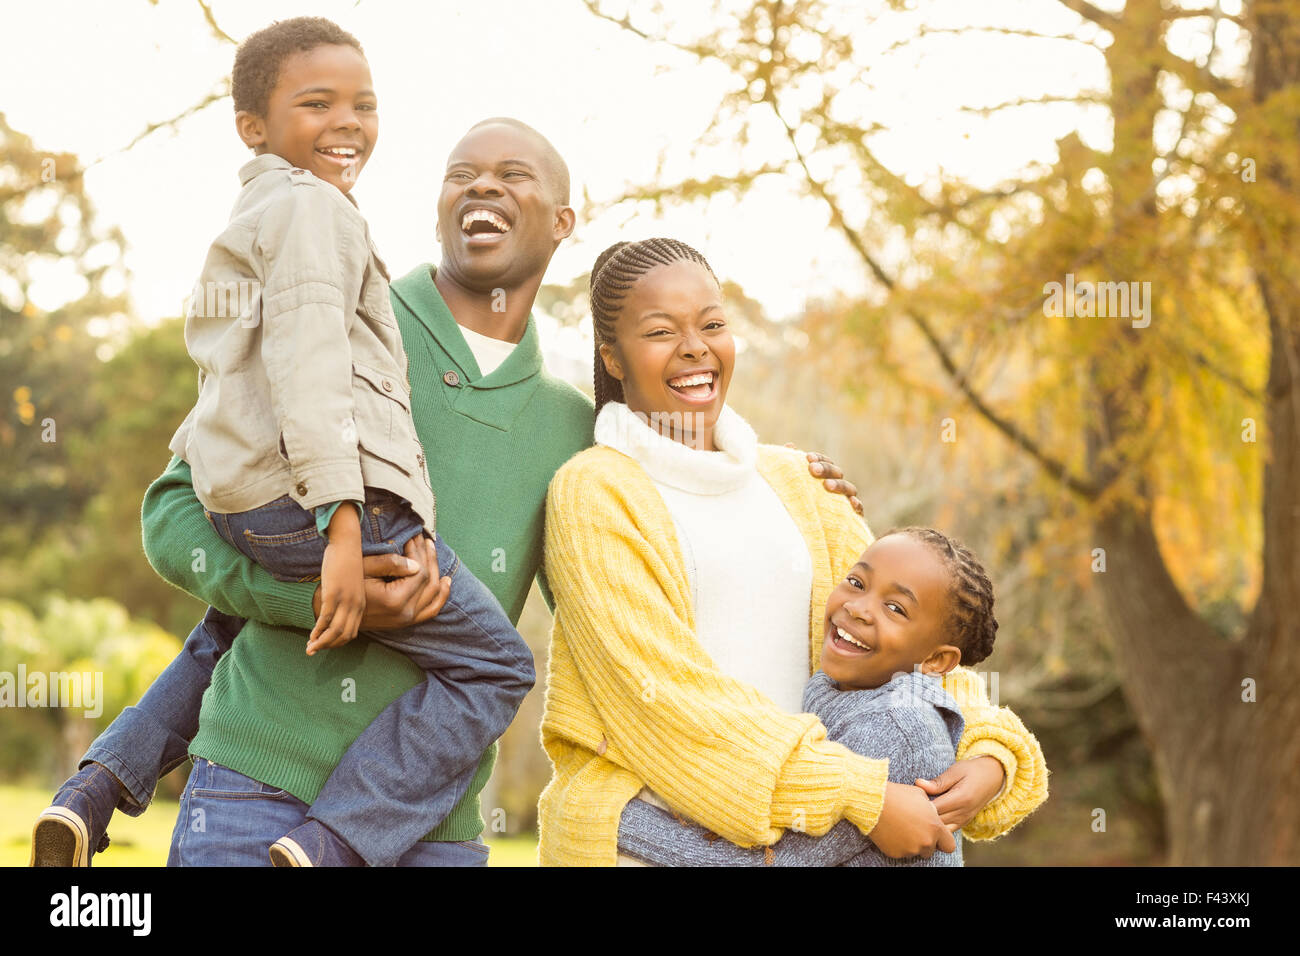 Portrait of a smiling young family laughing Stock Photo